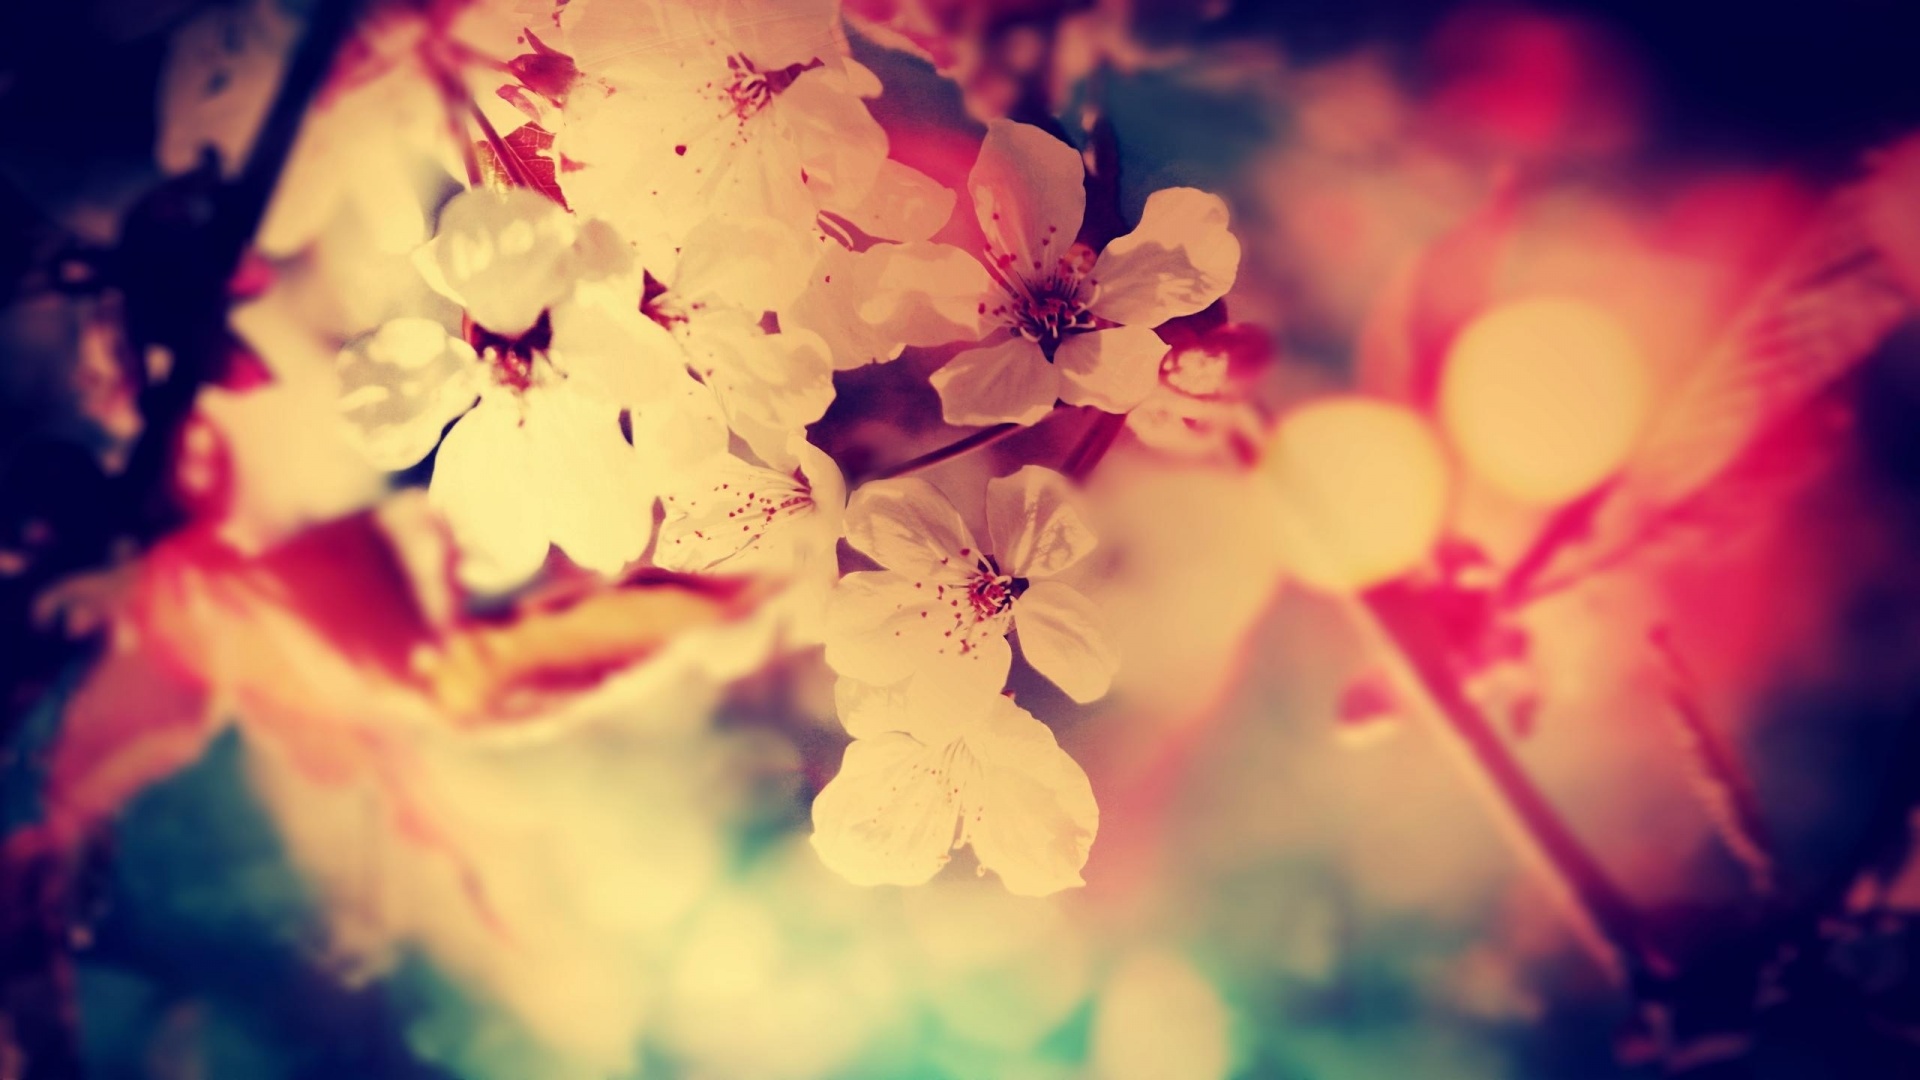 vintage flowers wallpapers categories nature wallpapers